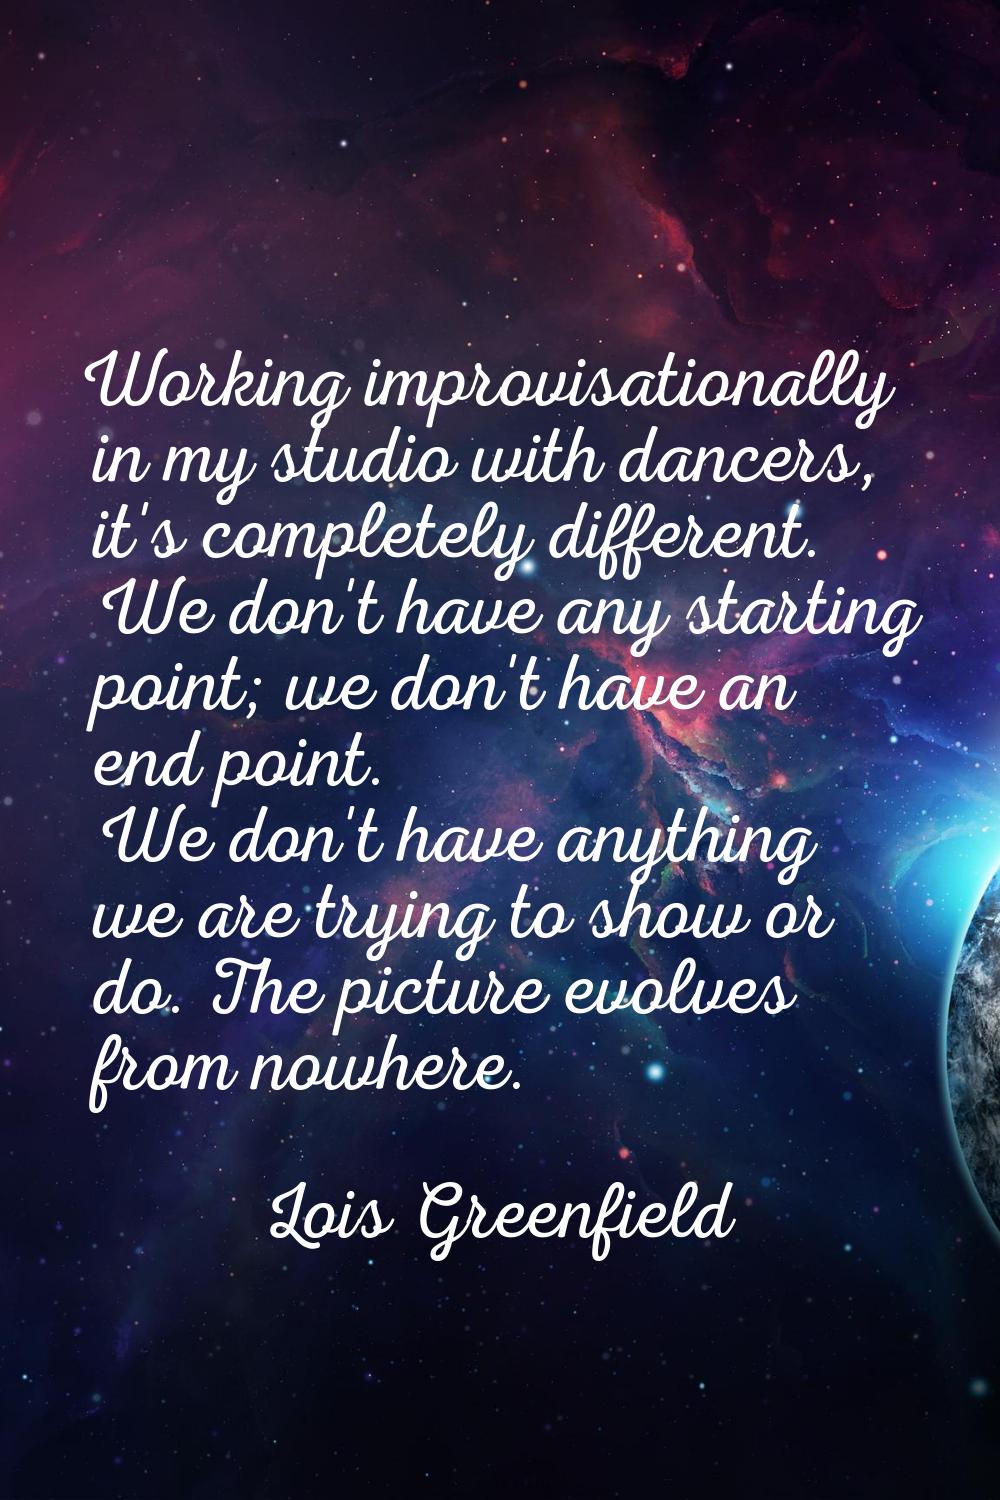 Working improvisationally in my studio with dancers, it's completely different. We don't have any s